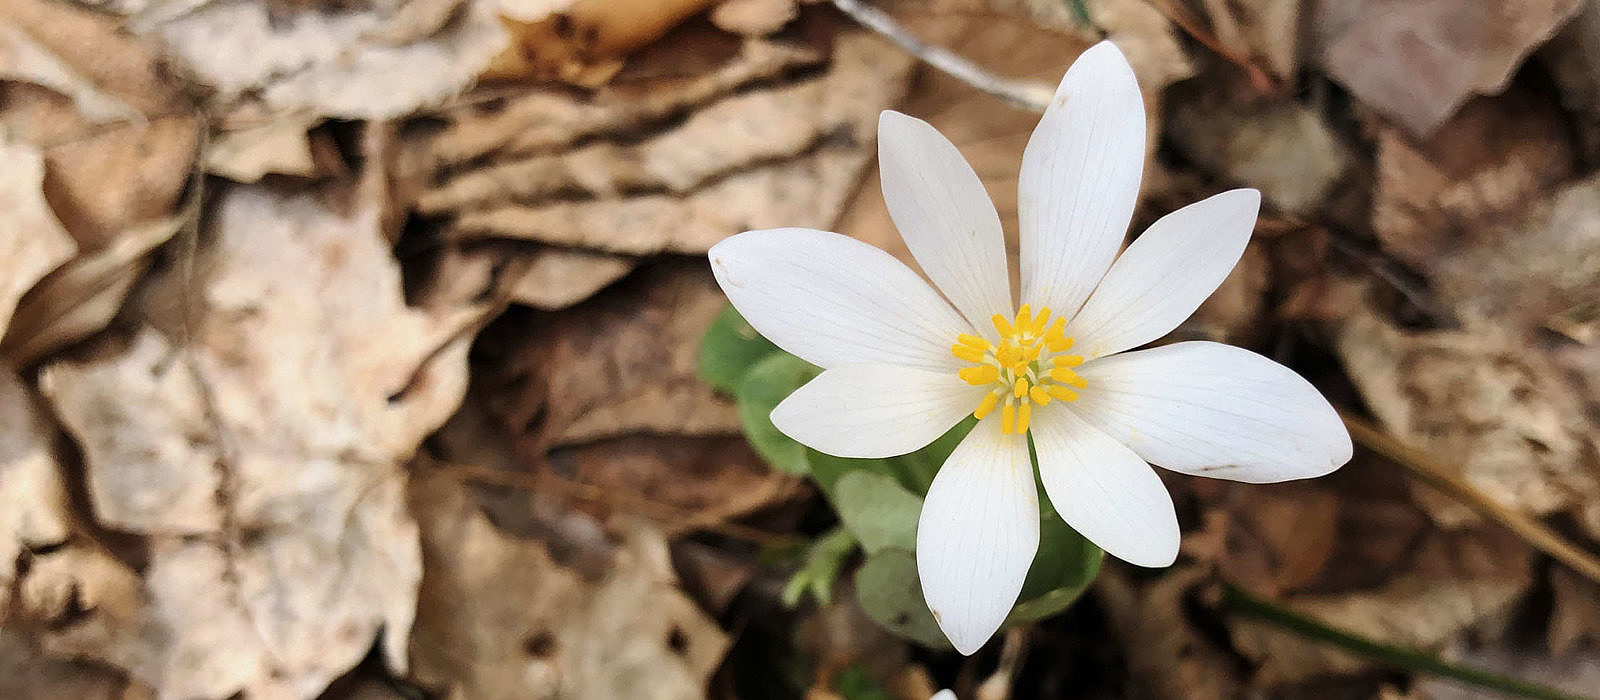 Bloodroot — one of the earliest spring wildflowers — blossoms white against a backdrop of fallen leaves. (photo © Brett Amy Thelen)